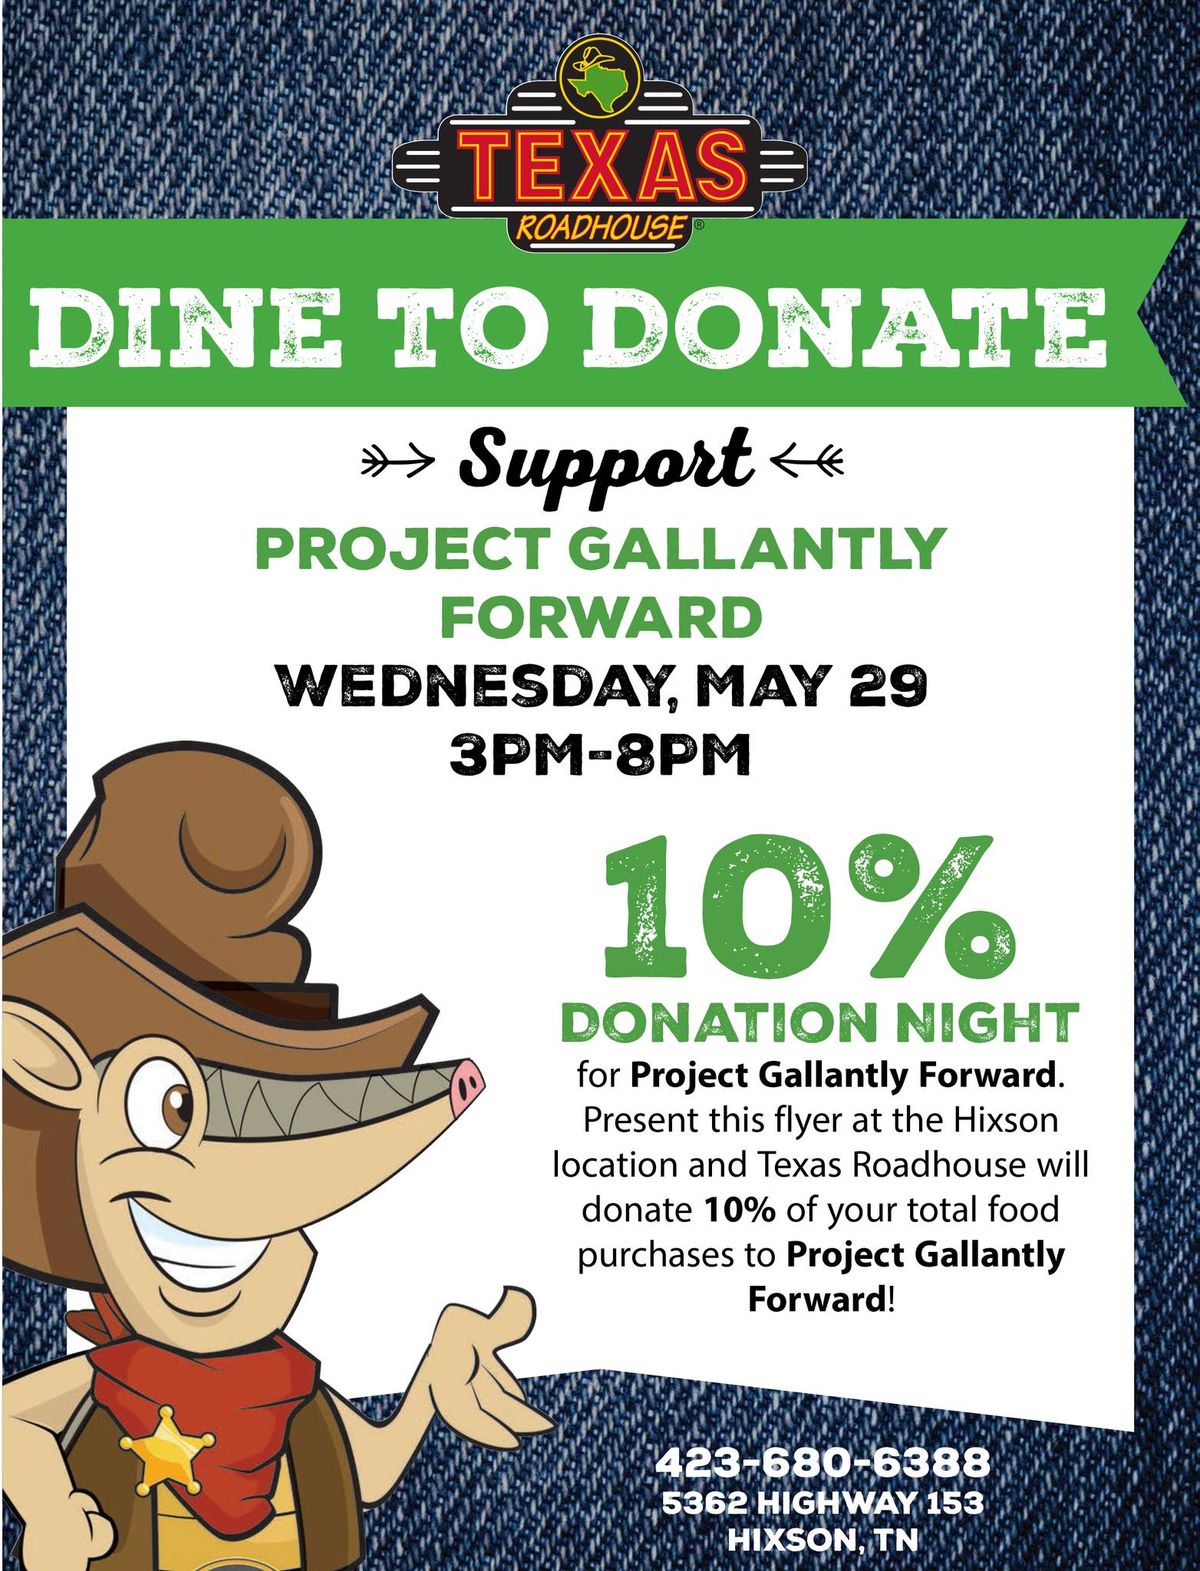 Texas Roadhouse Dine to Donate - Project Gallantly Forward Night